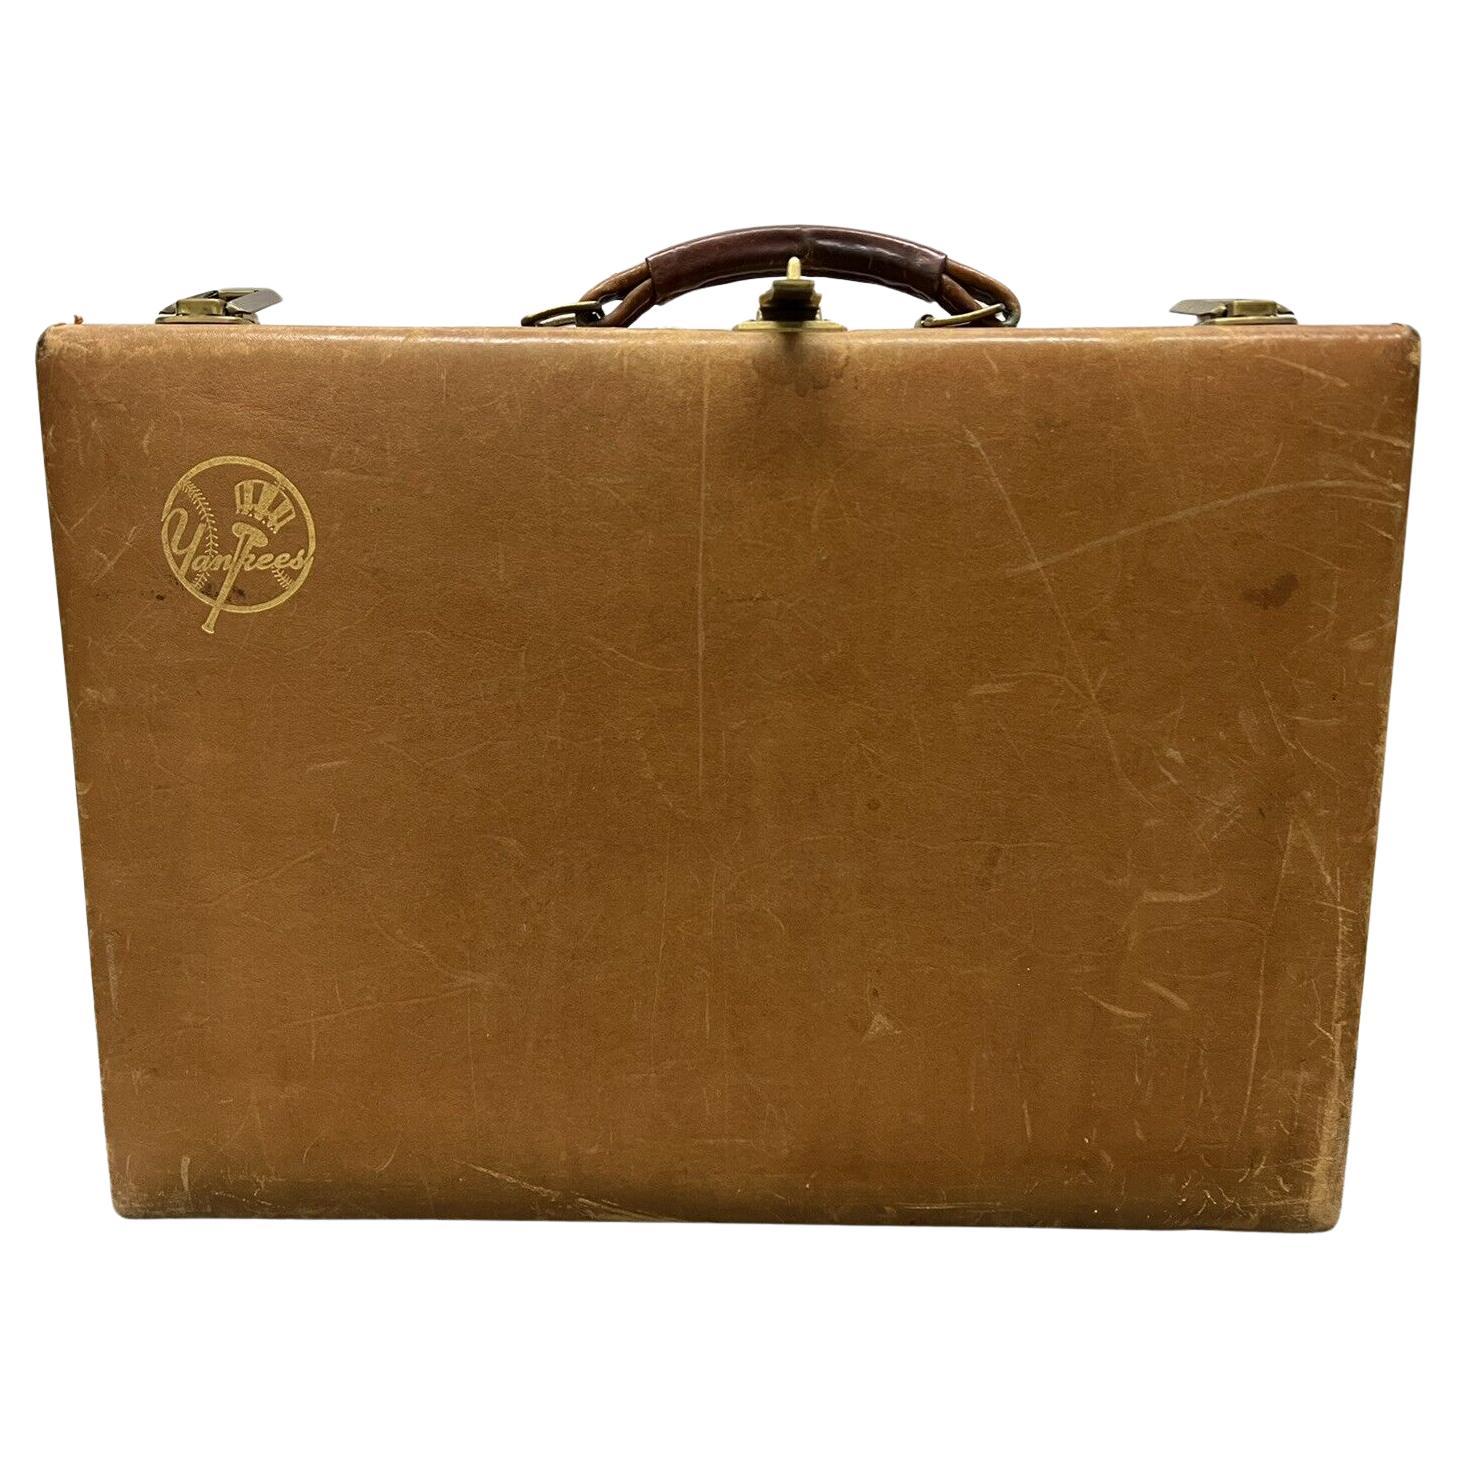 Vintage New York YANKEES Gilt Embossed Leather Briefcase For Sale